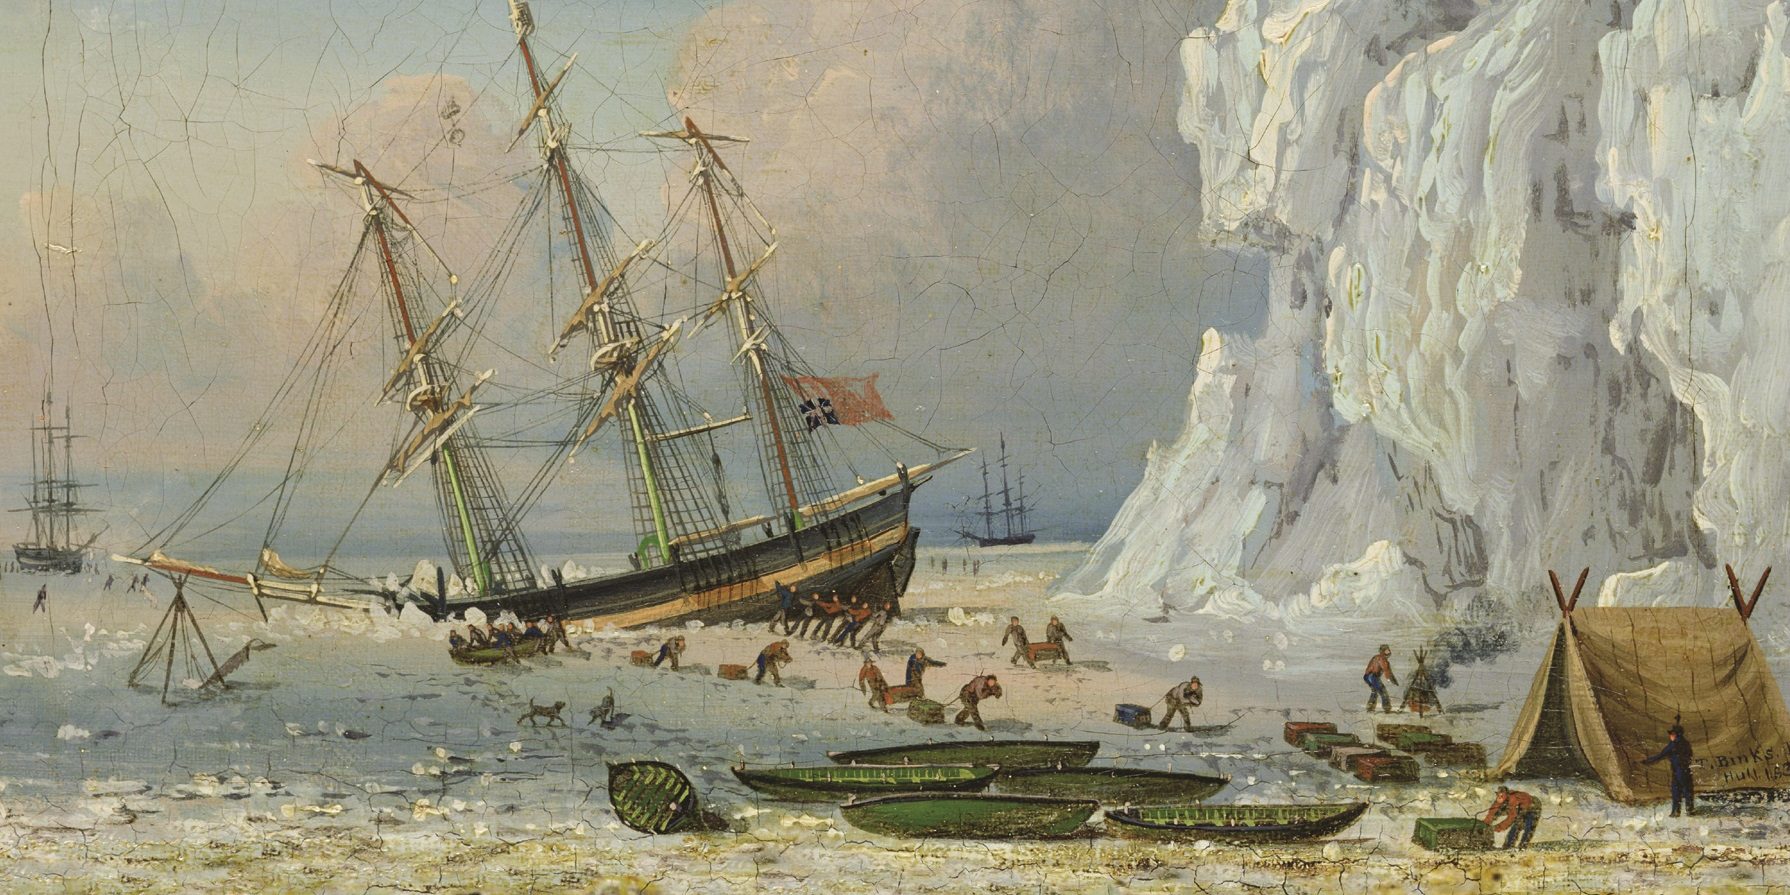 A painting of whalers caught in the Arctic ice